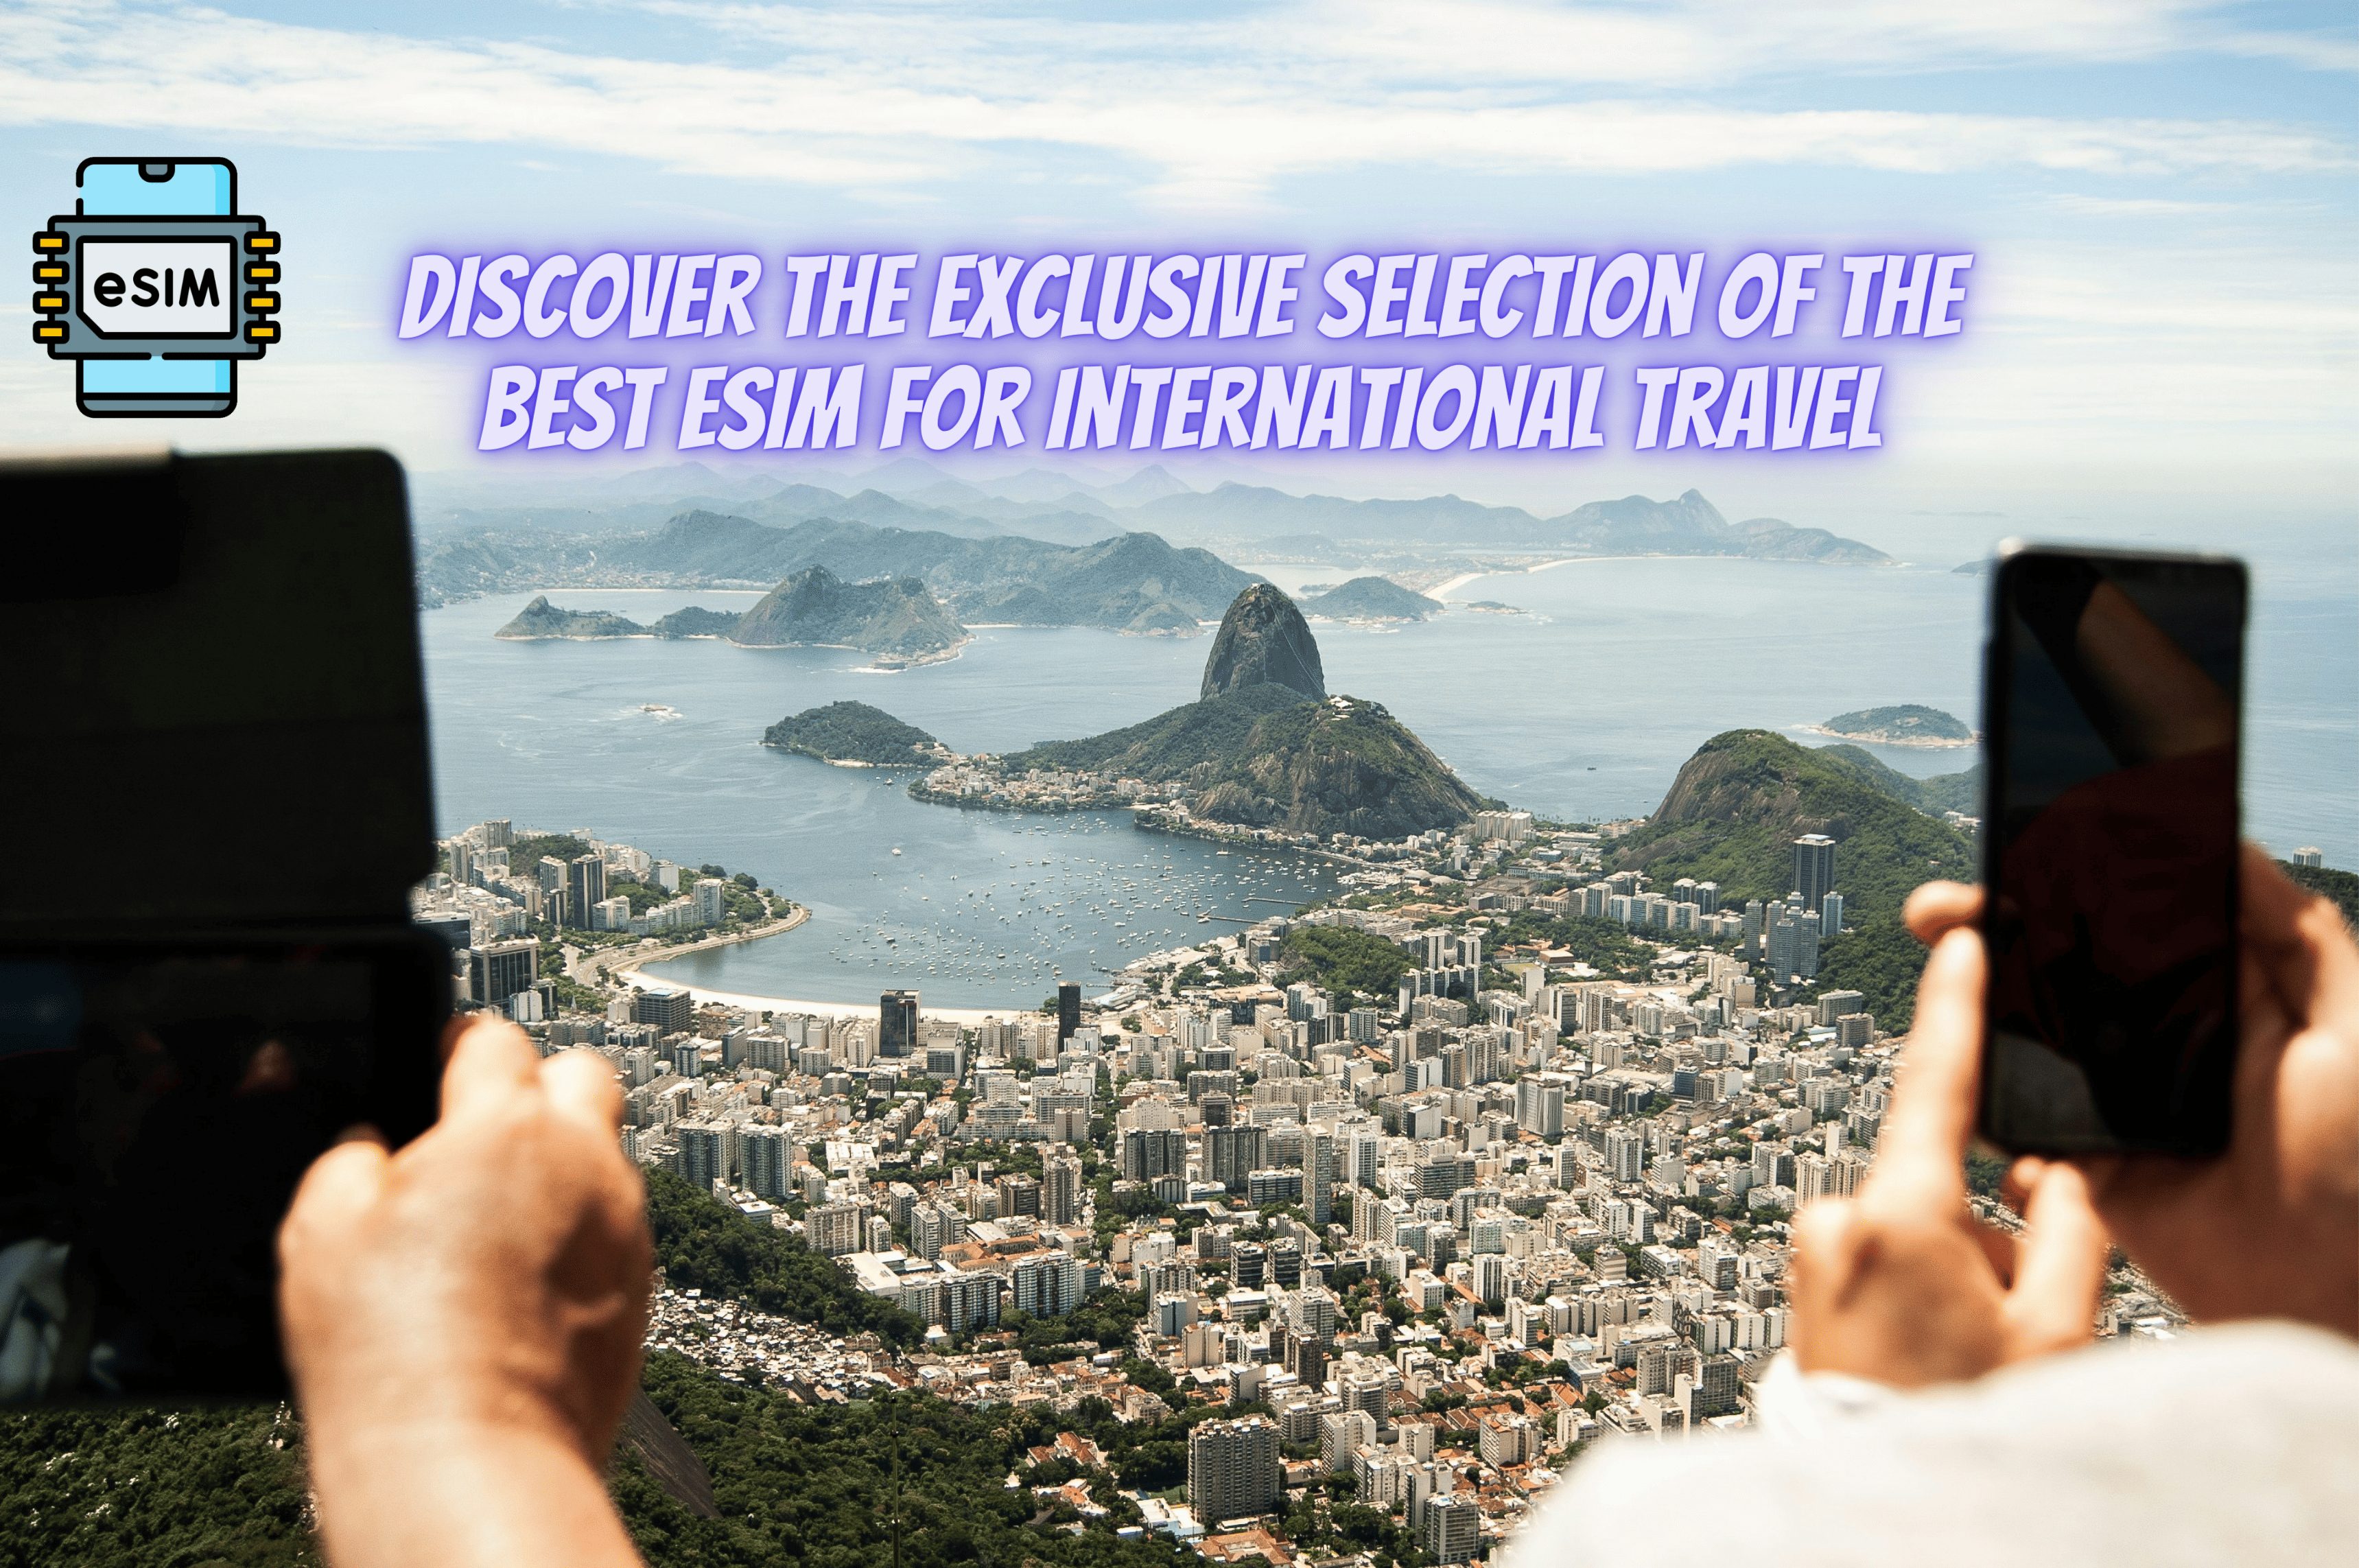 Discover the Exclusive Selection of the 10 Best eSIM for International Travel